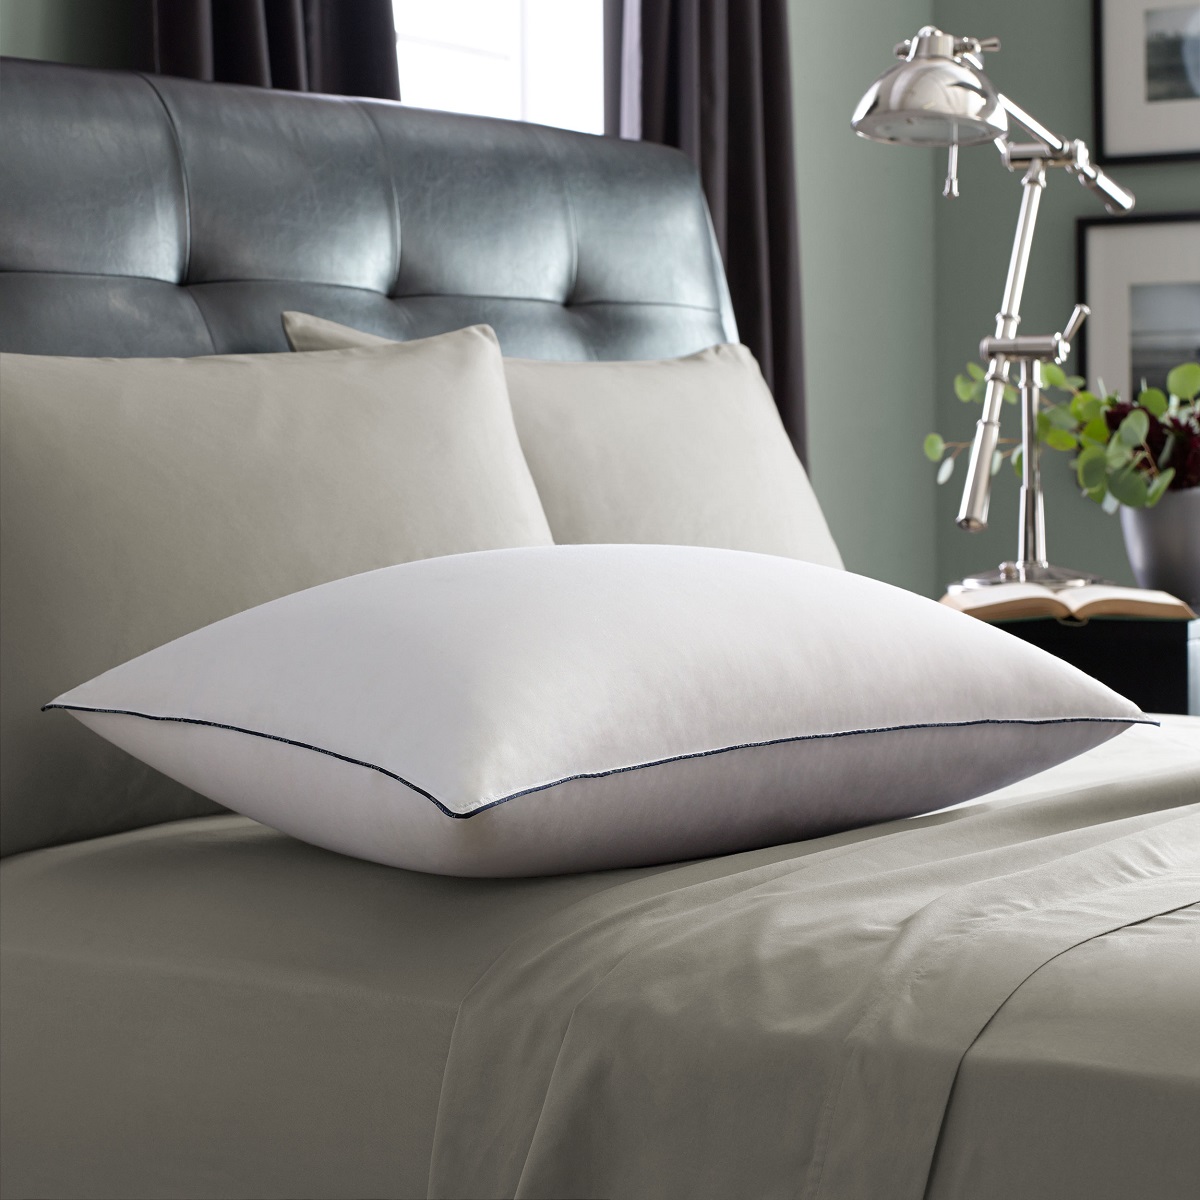 Are Down Pillows Ethical? Find Out How This Luxury Filling Is Sourced